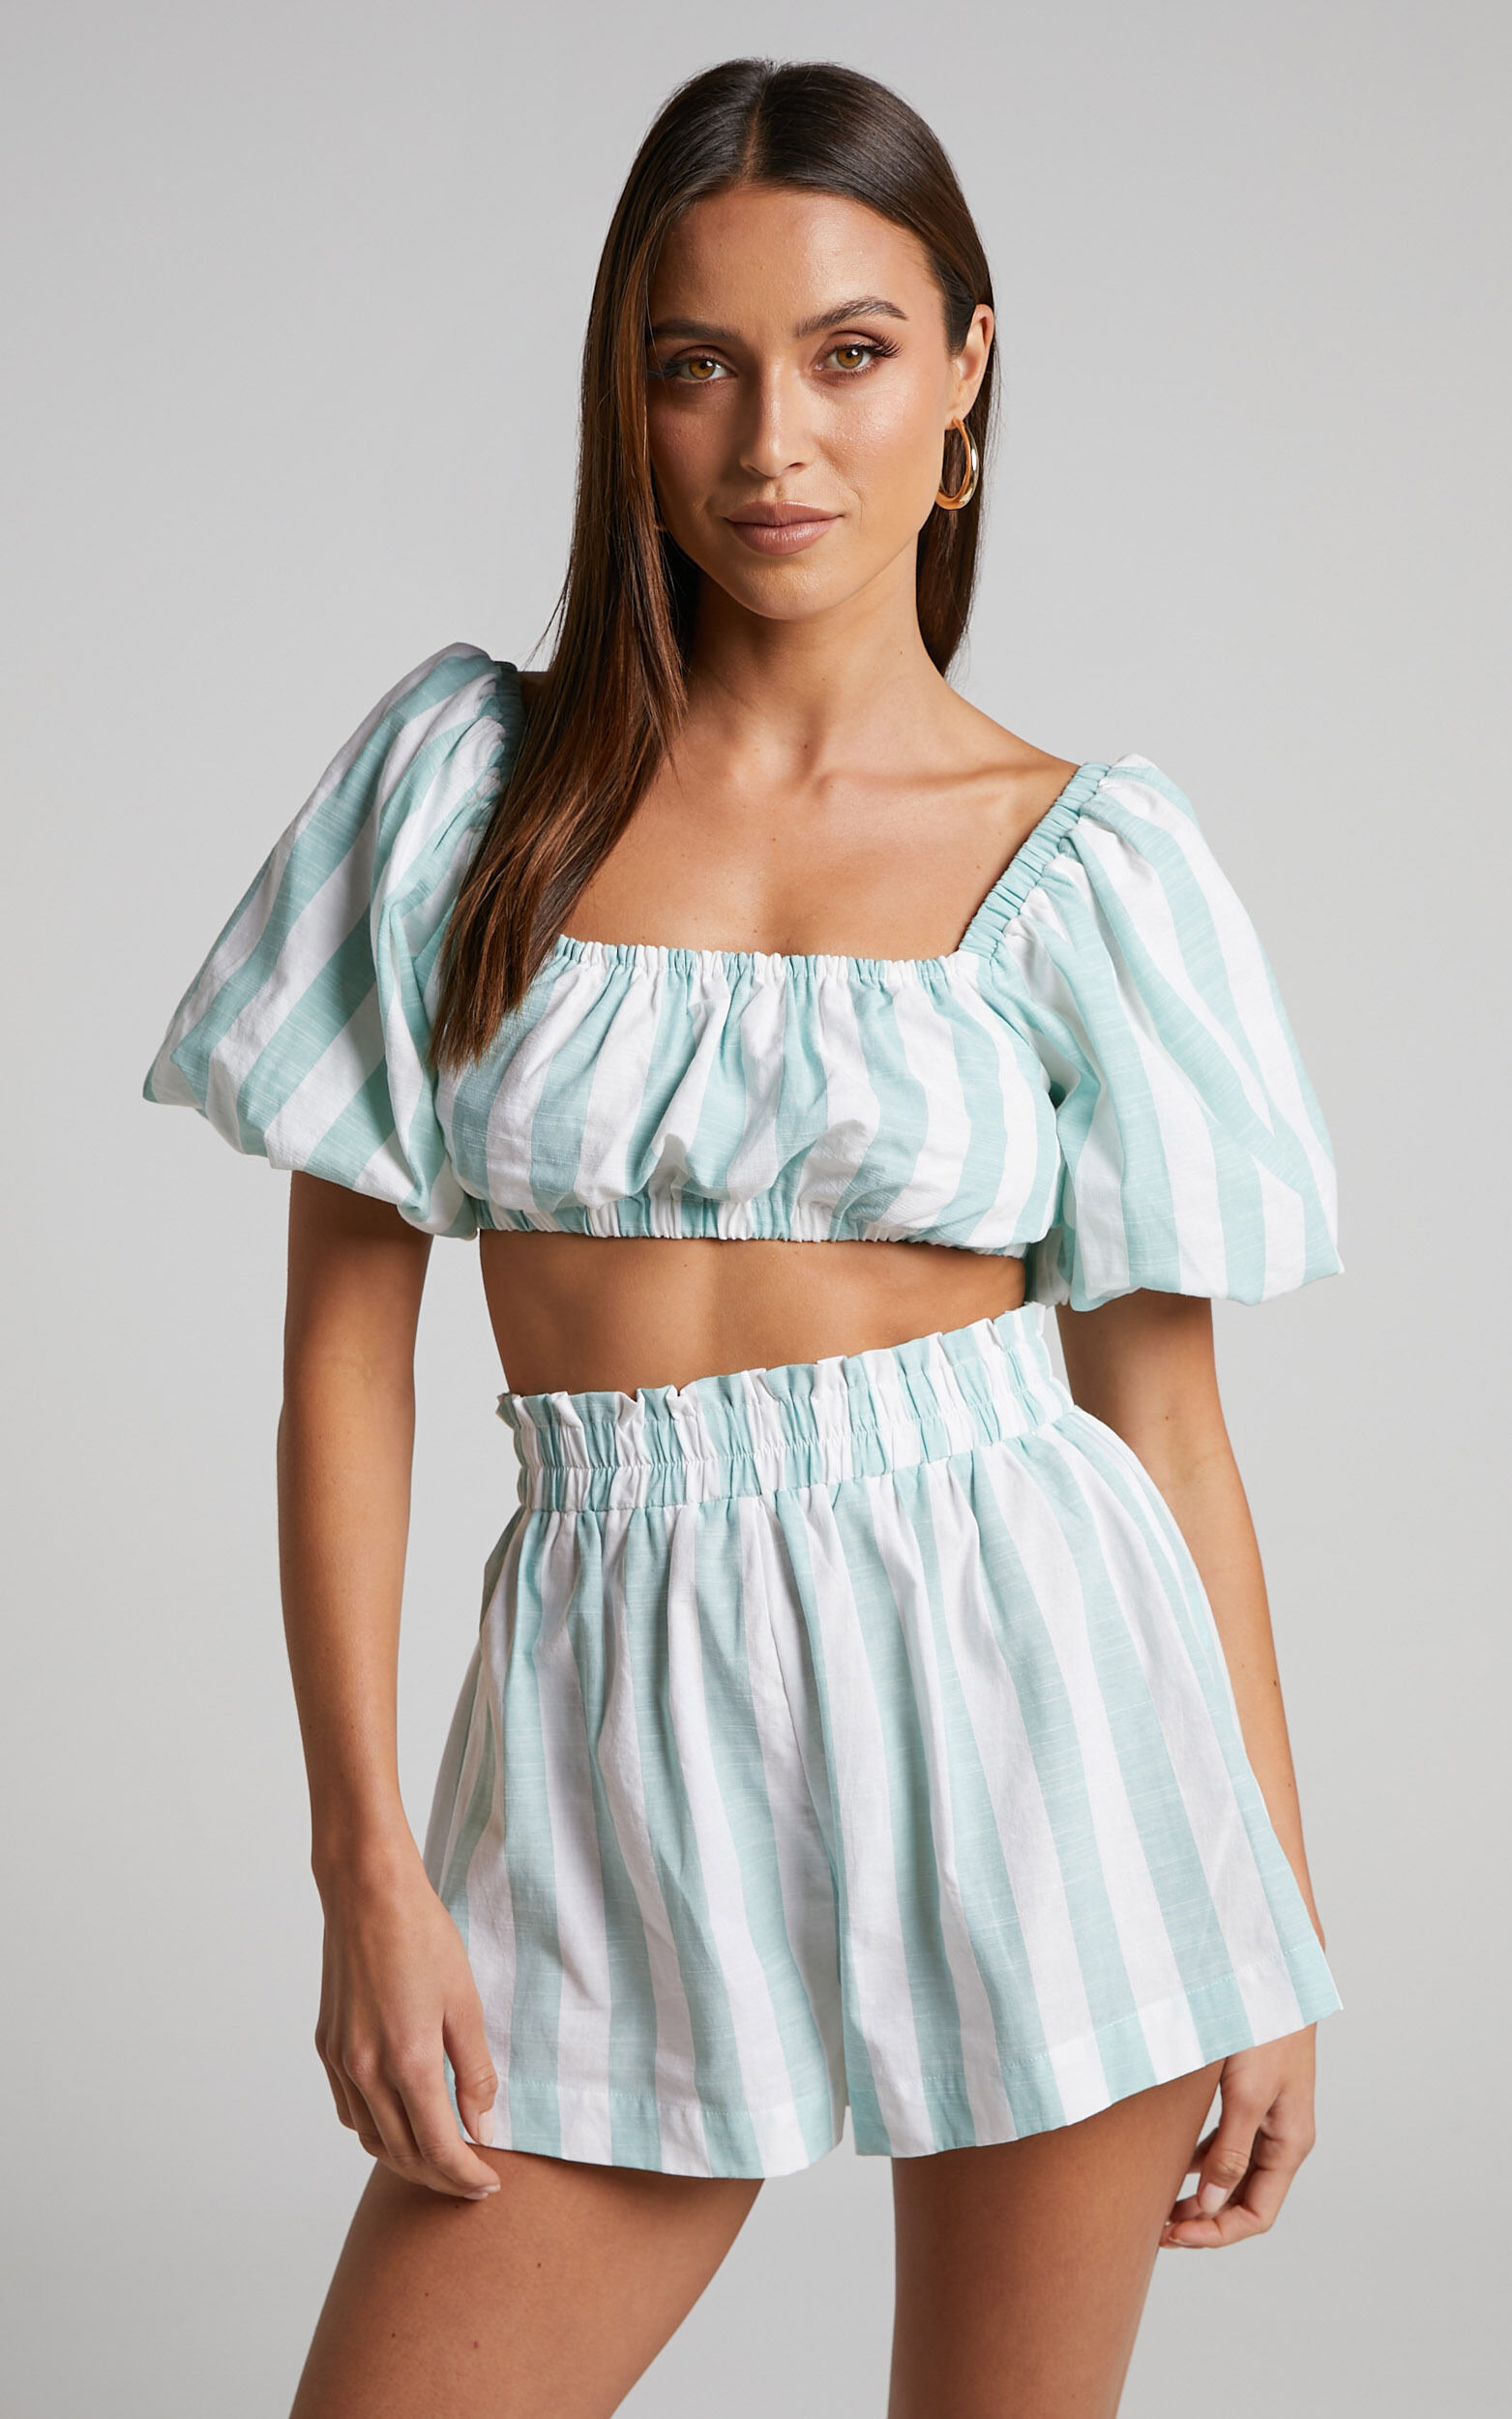 Sahle Top - Striped Puff Sleeve Crop Top in Mint - 06, GRN2